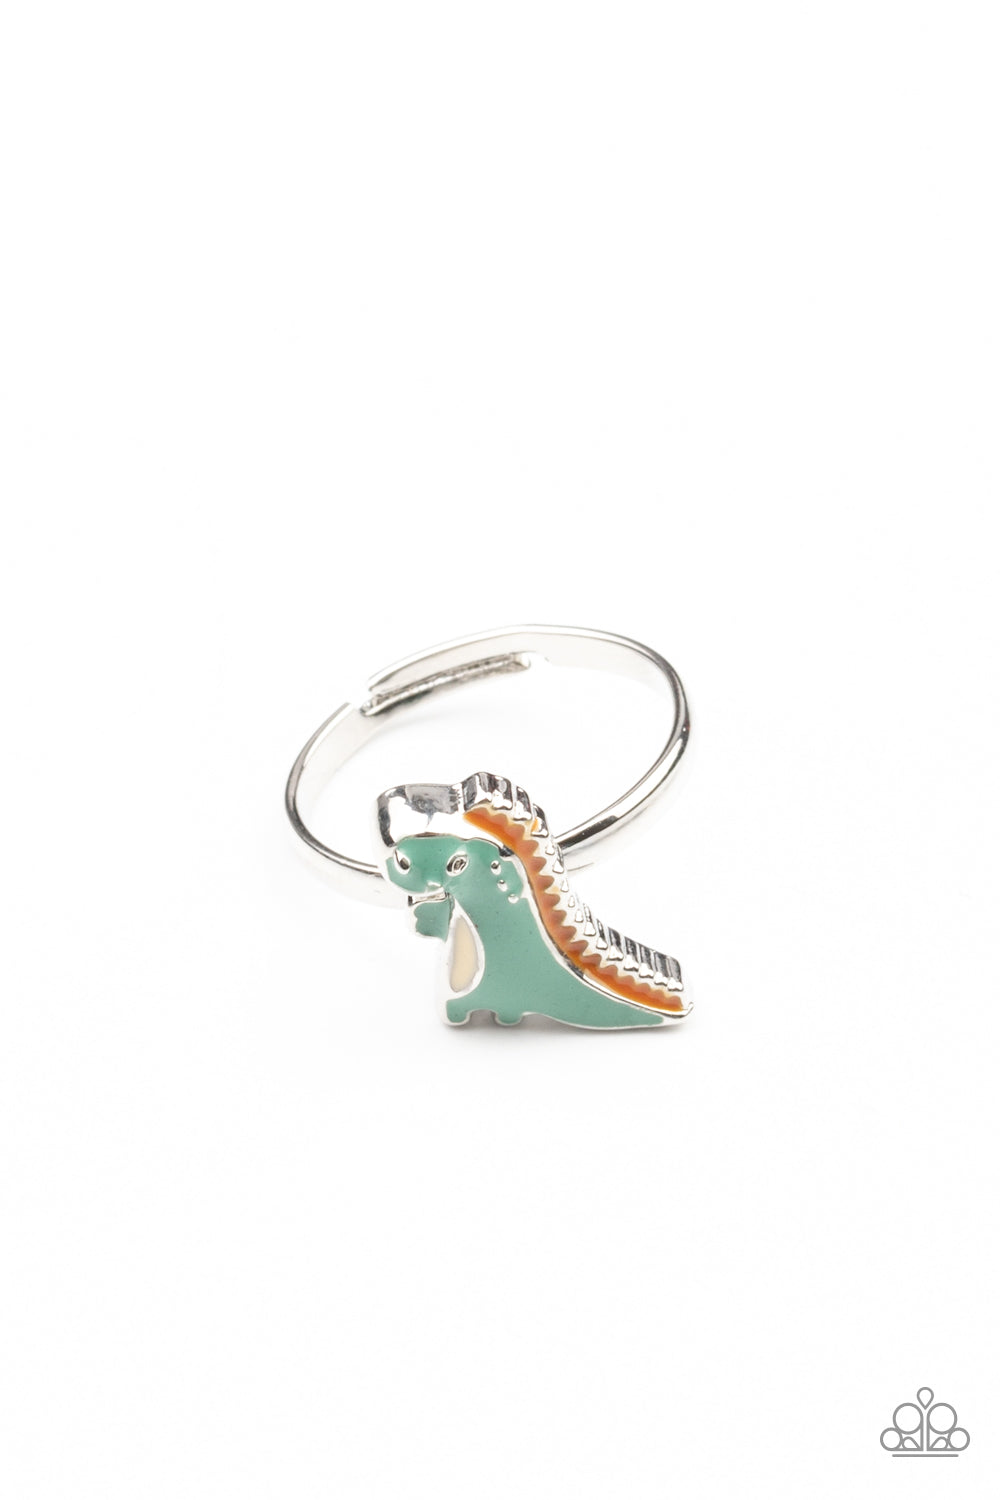 Starlet Shimmers Dinosaurs Ring Kit Paparazzi Accessories (P4SS-MTXX-271XX) $5 Kids Ring Jewelry